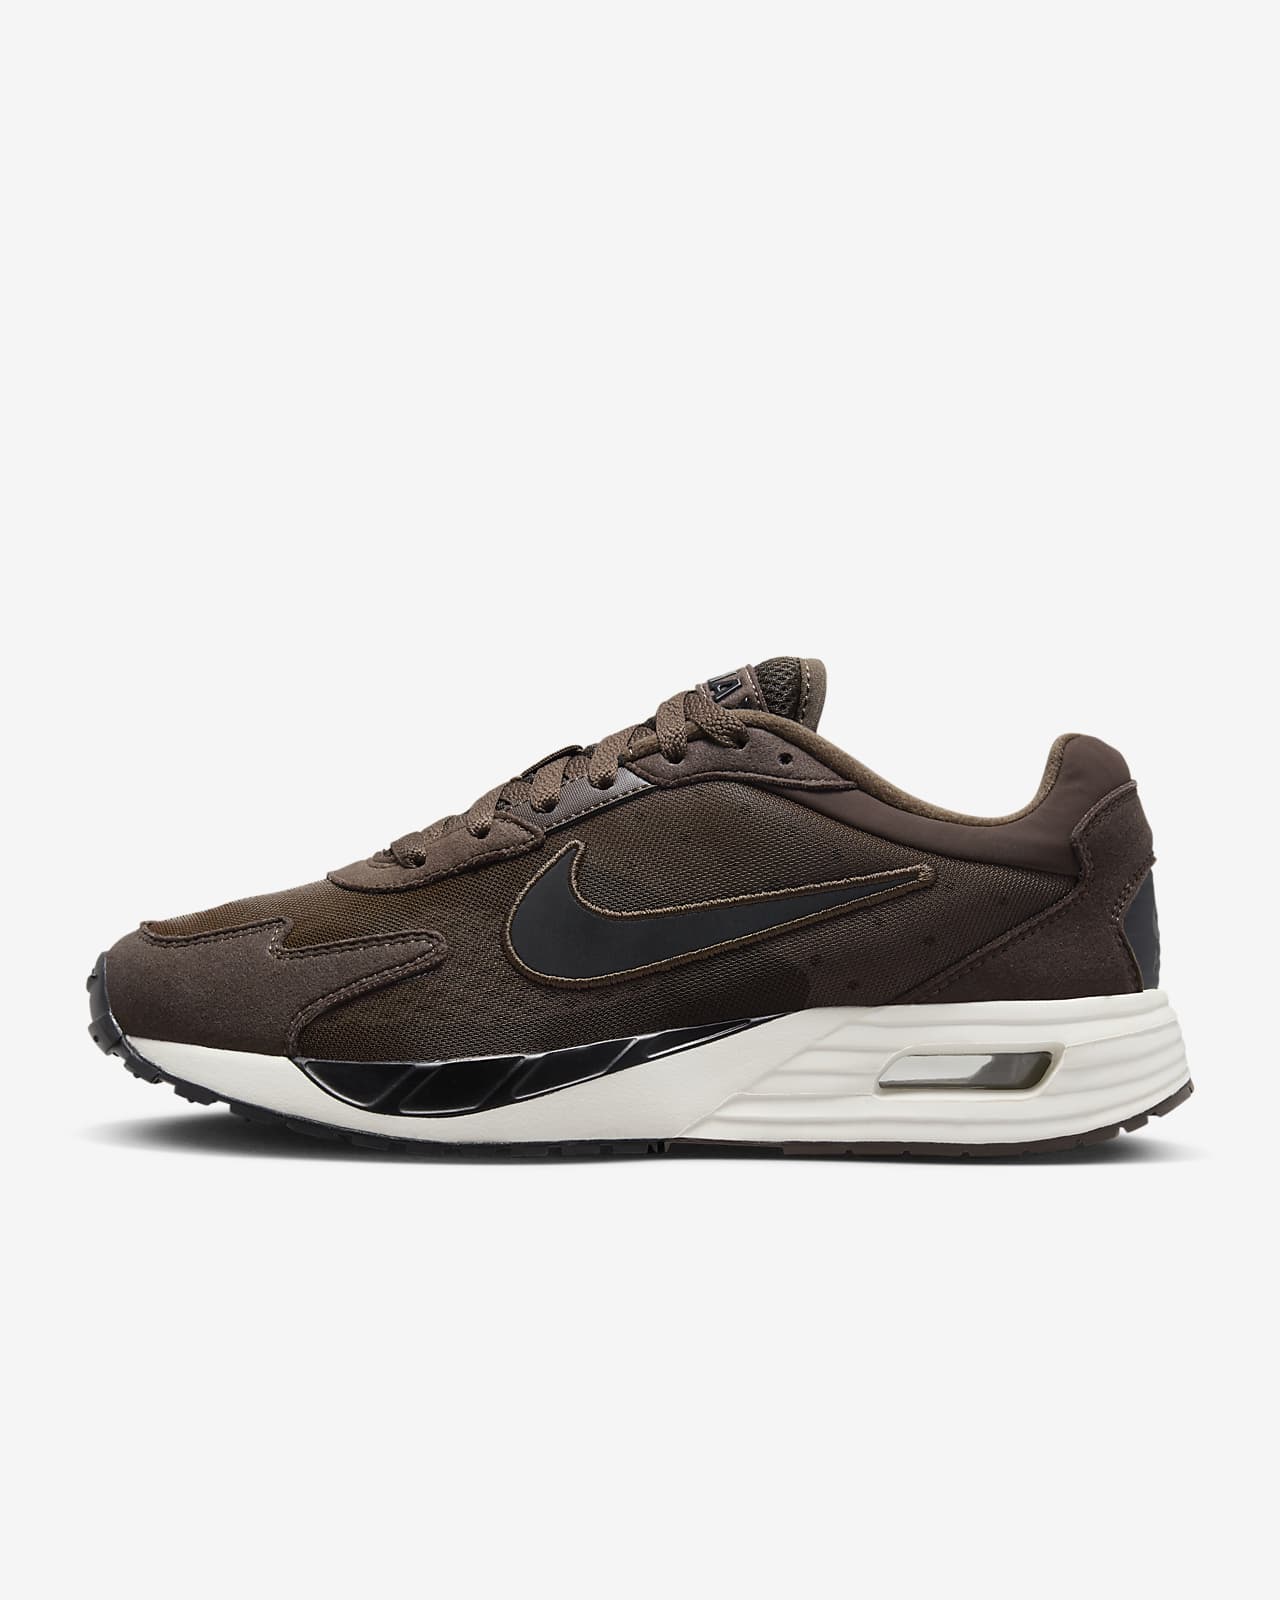 Nike Air Max Solo Women's Shoes.